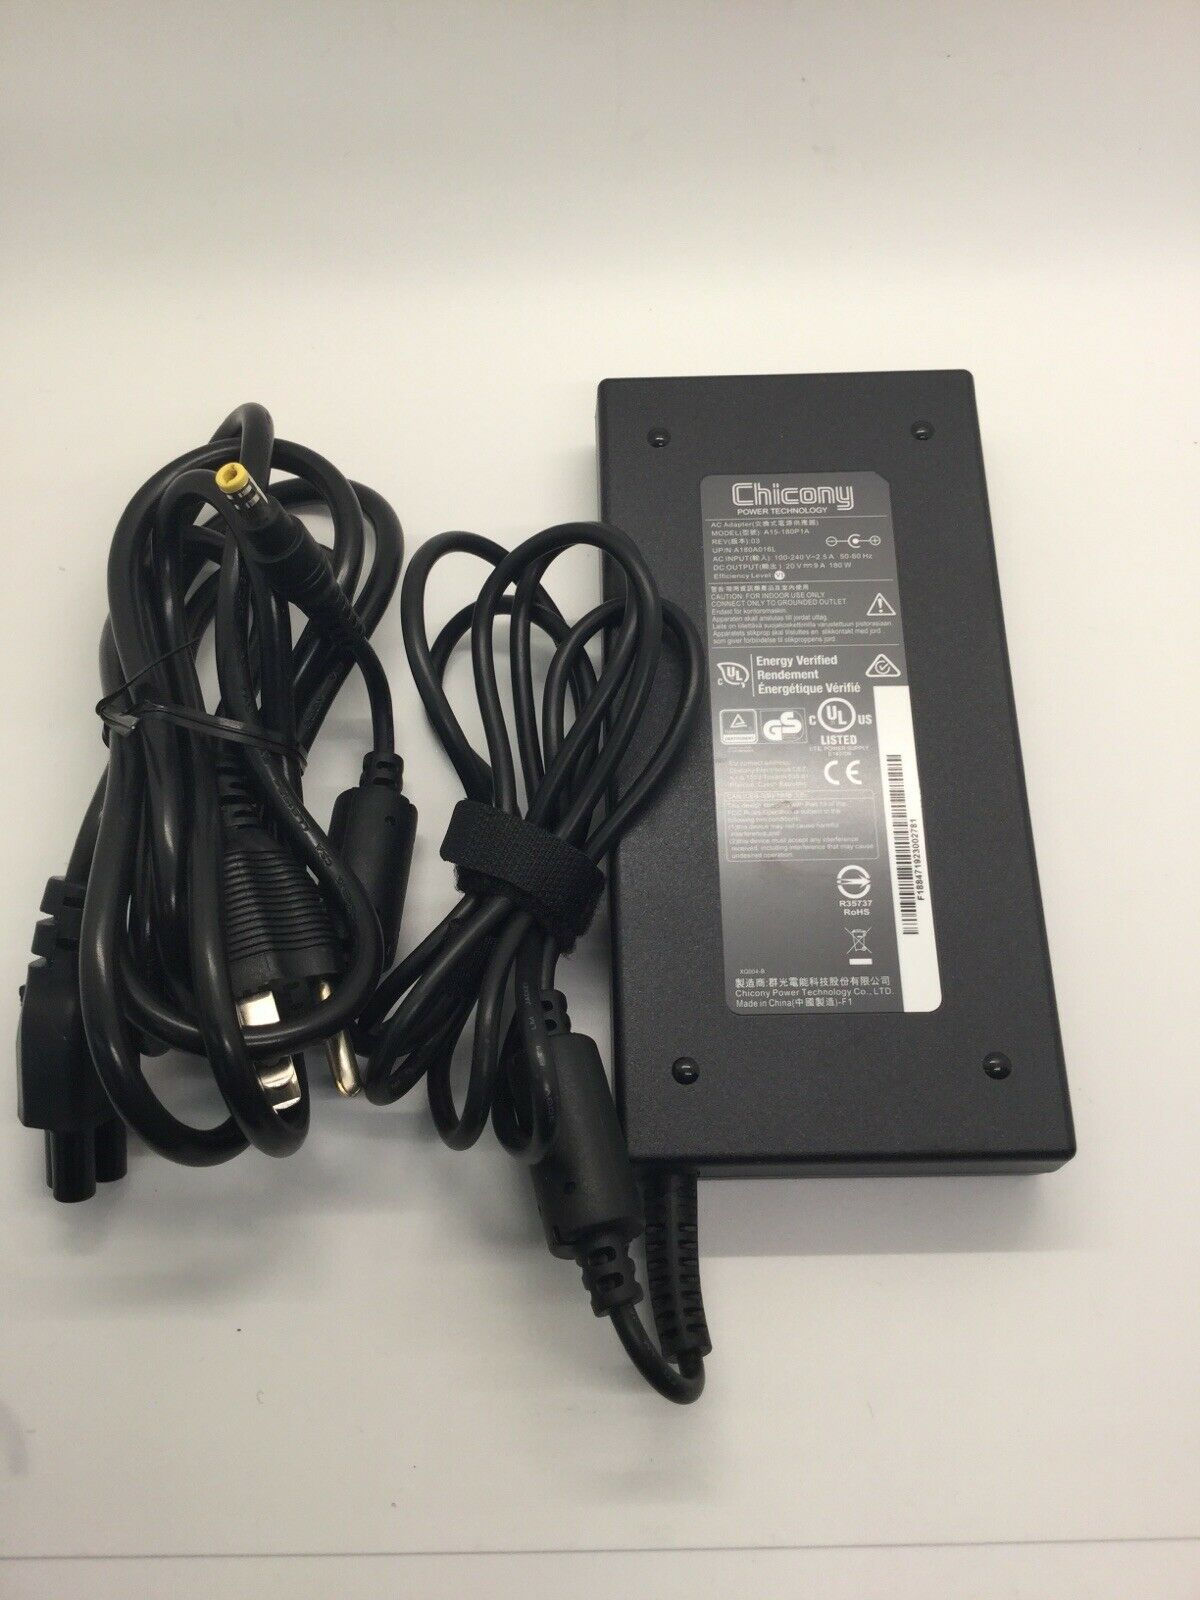 NEW A15-180P1A Genuine Chicony 180W 20V 9A AC Adapter Power Supply for MSI Laptop Compatible Brand: For MSI MPN: A15-18 - Click Image to Close